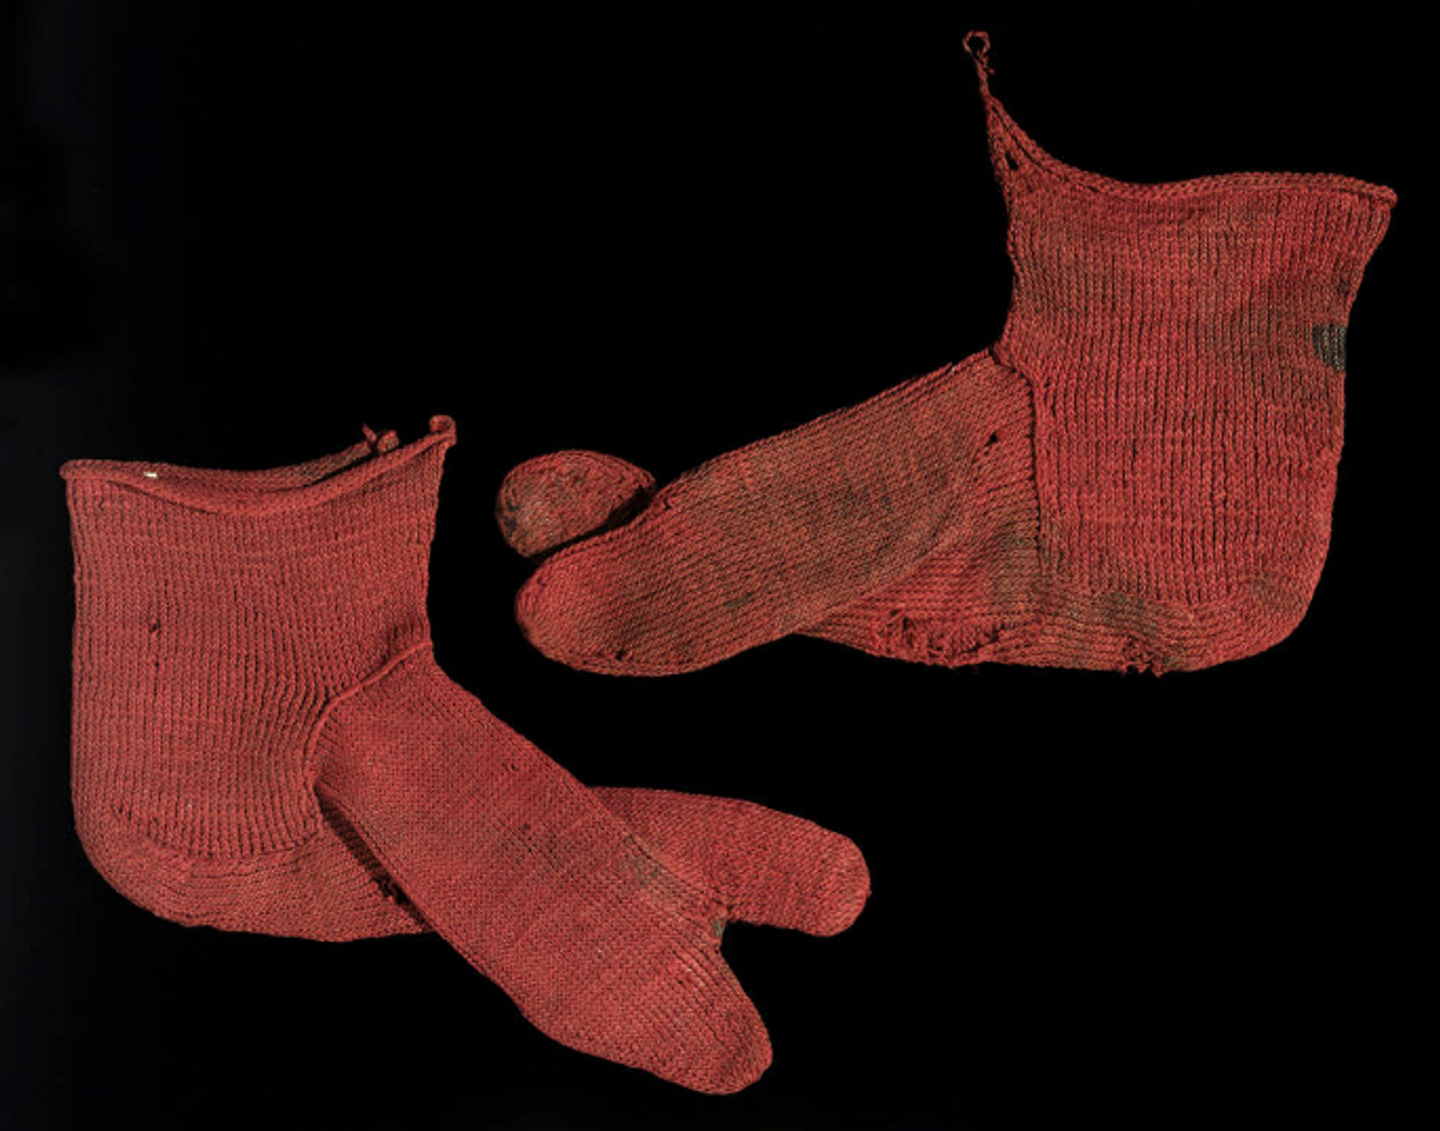 Ancient socks. Photo taken from the site: https://www.vam.ac.uk/articles/the-history-of-hand-knitting